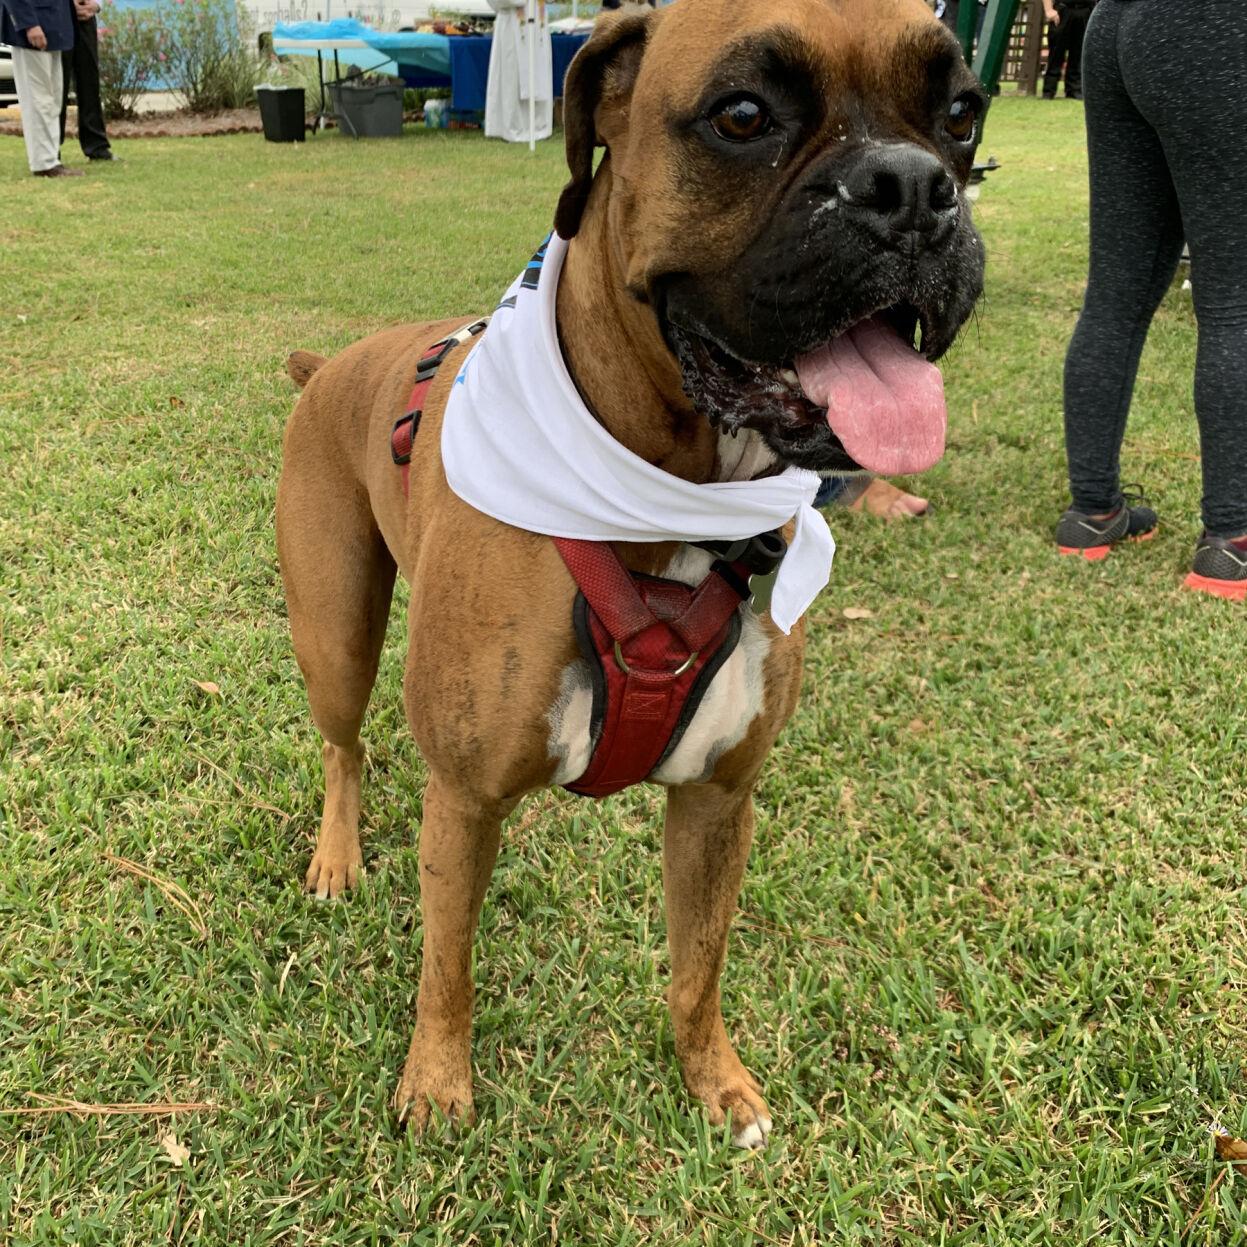 Area animal groups to benefit from Race to the Rescue through historic  Metairie Cemetery | Entertainment/Life 